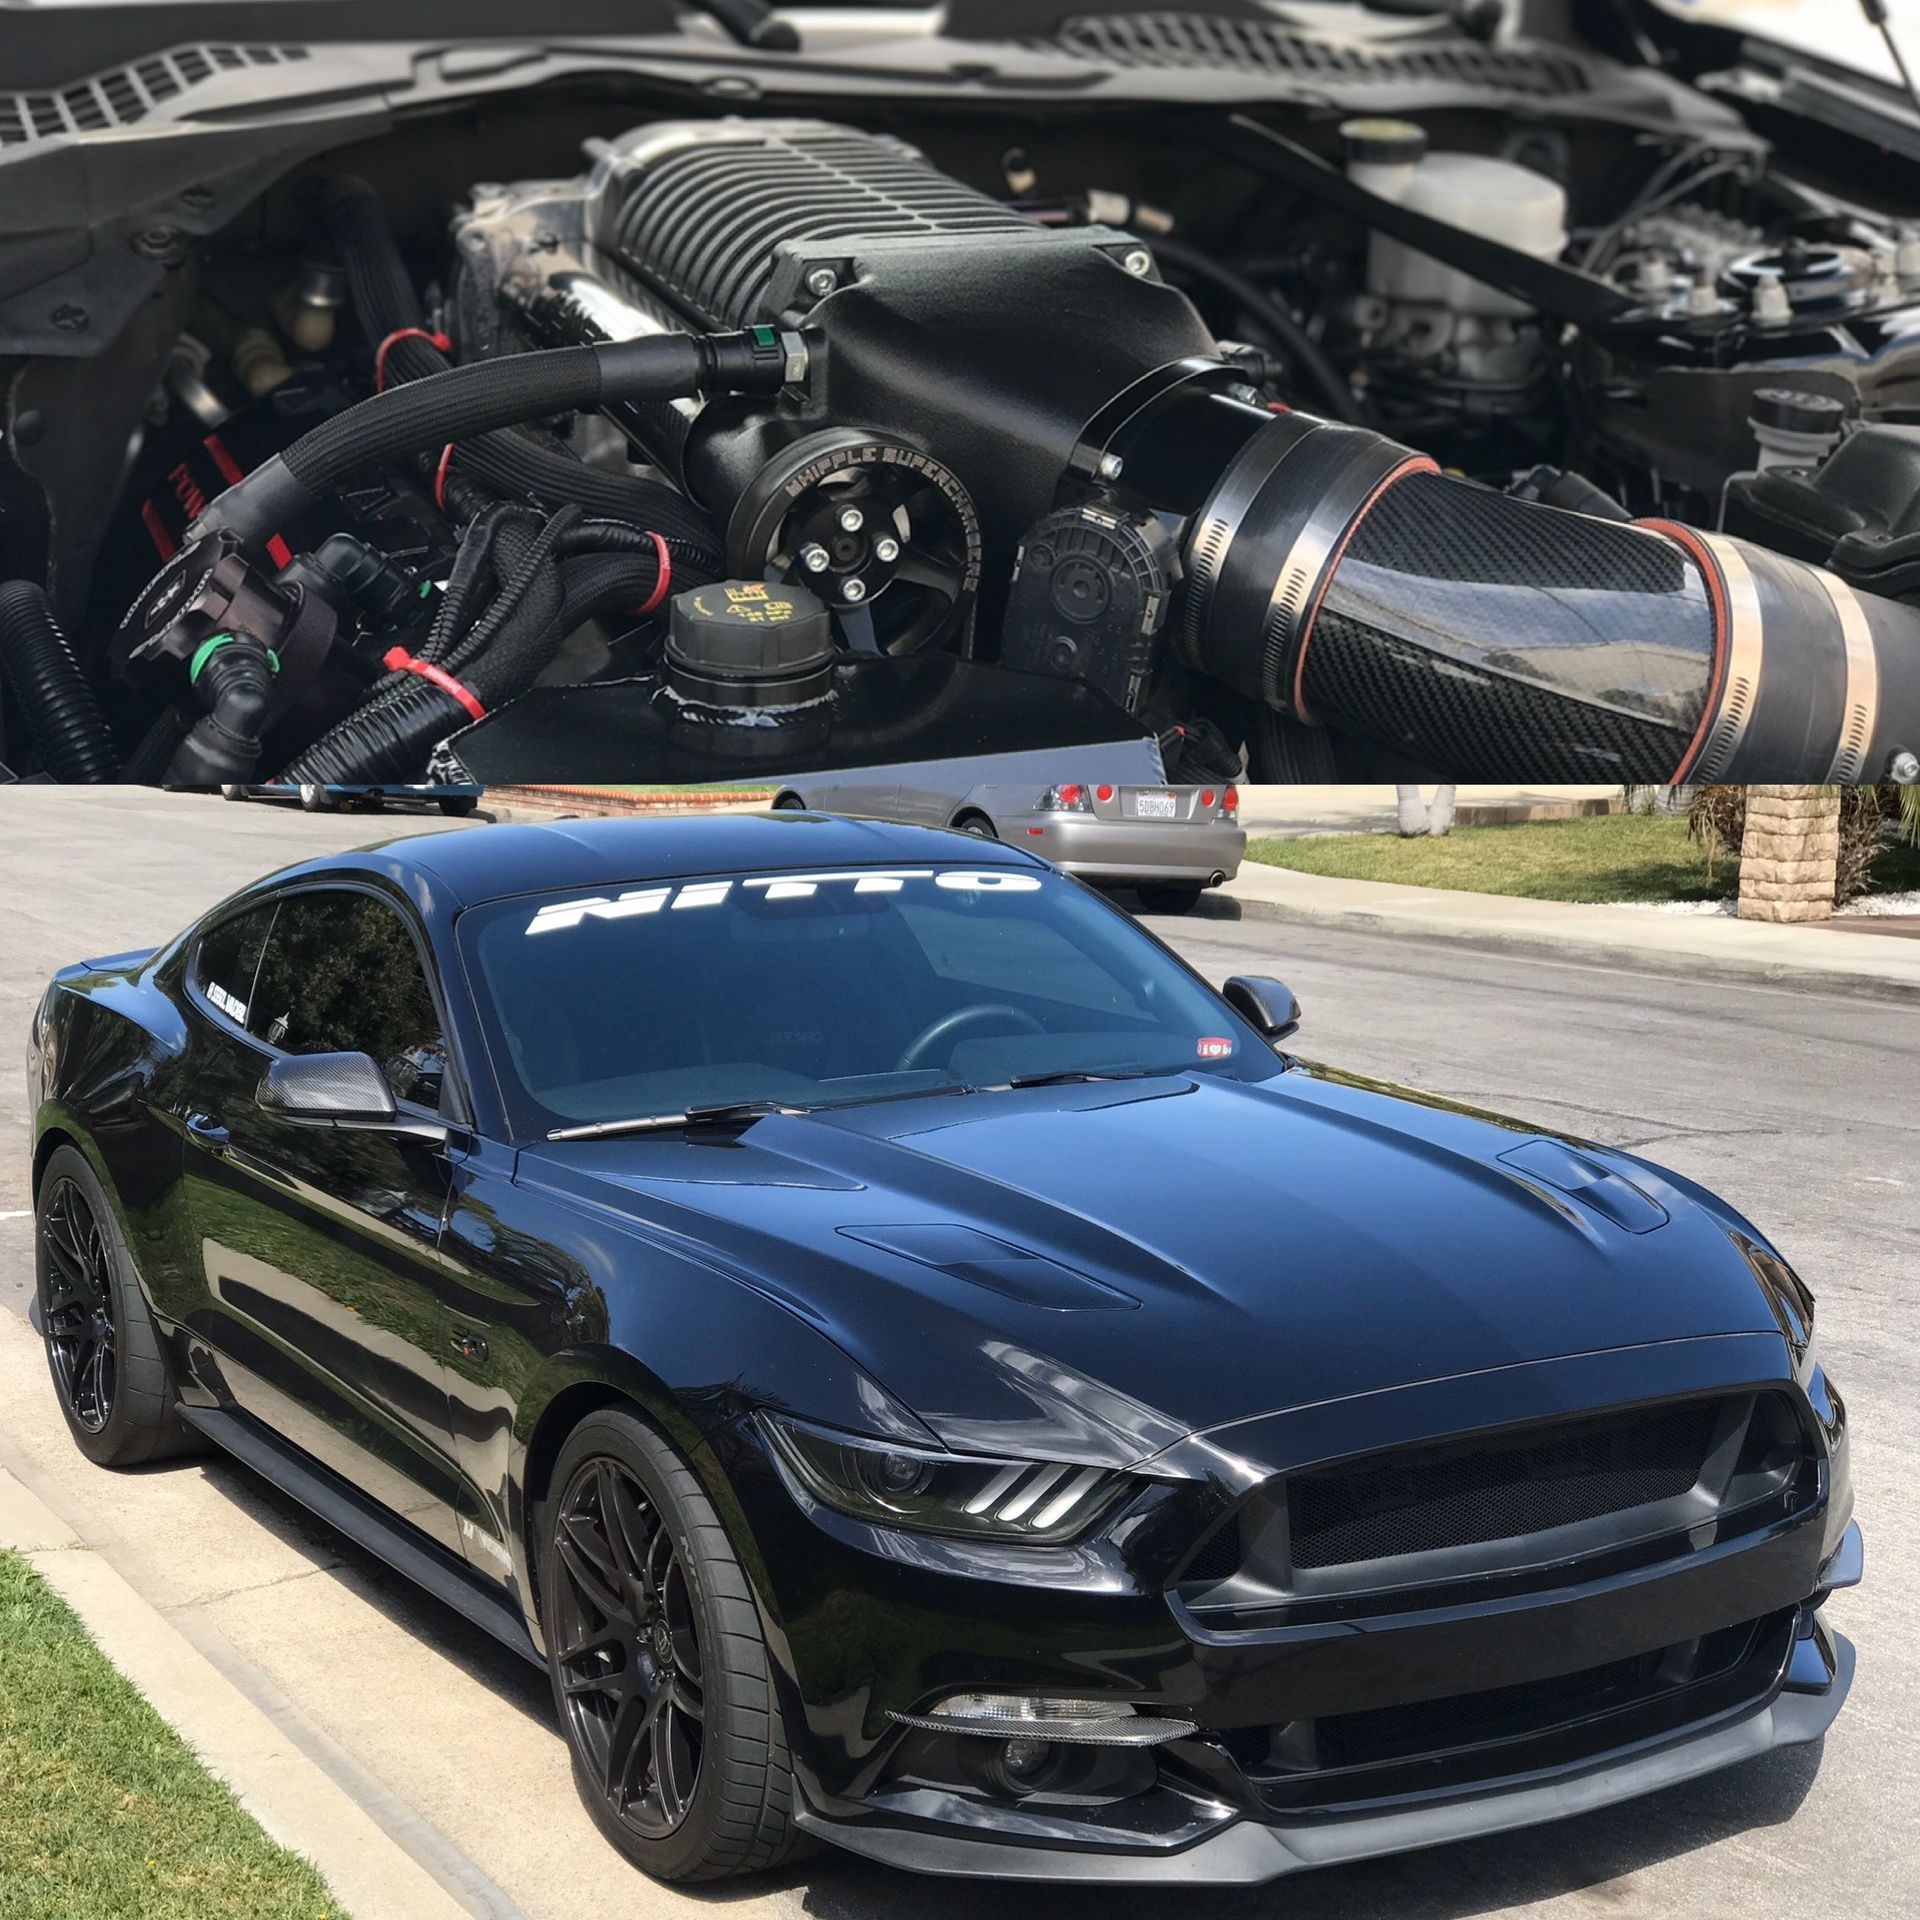 Mustang gt performance package with Whipple Supercharger